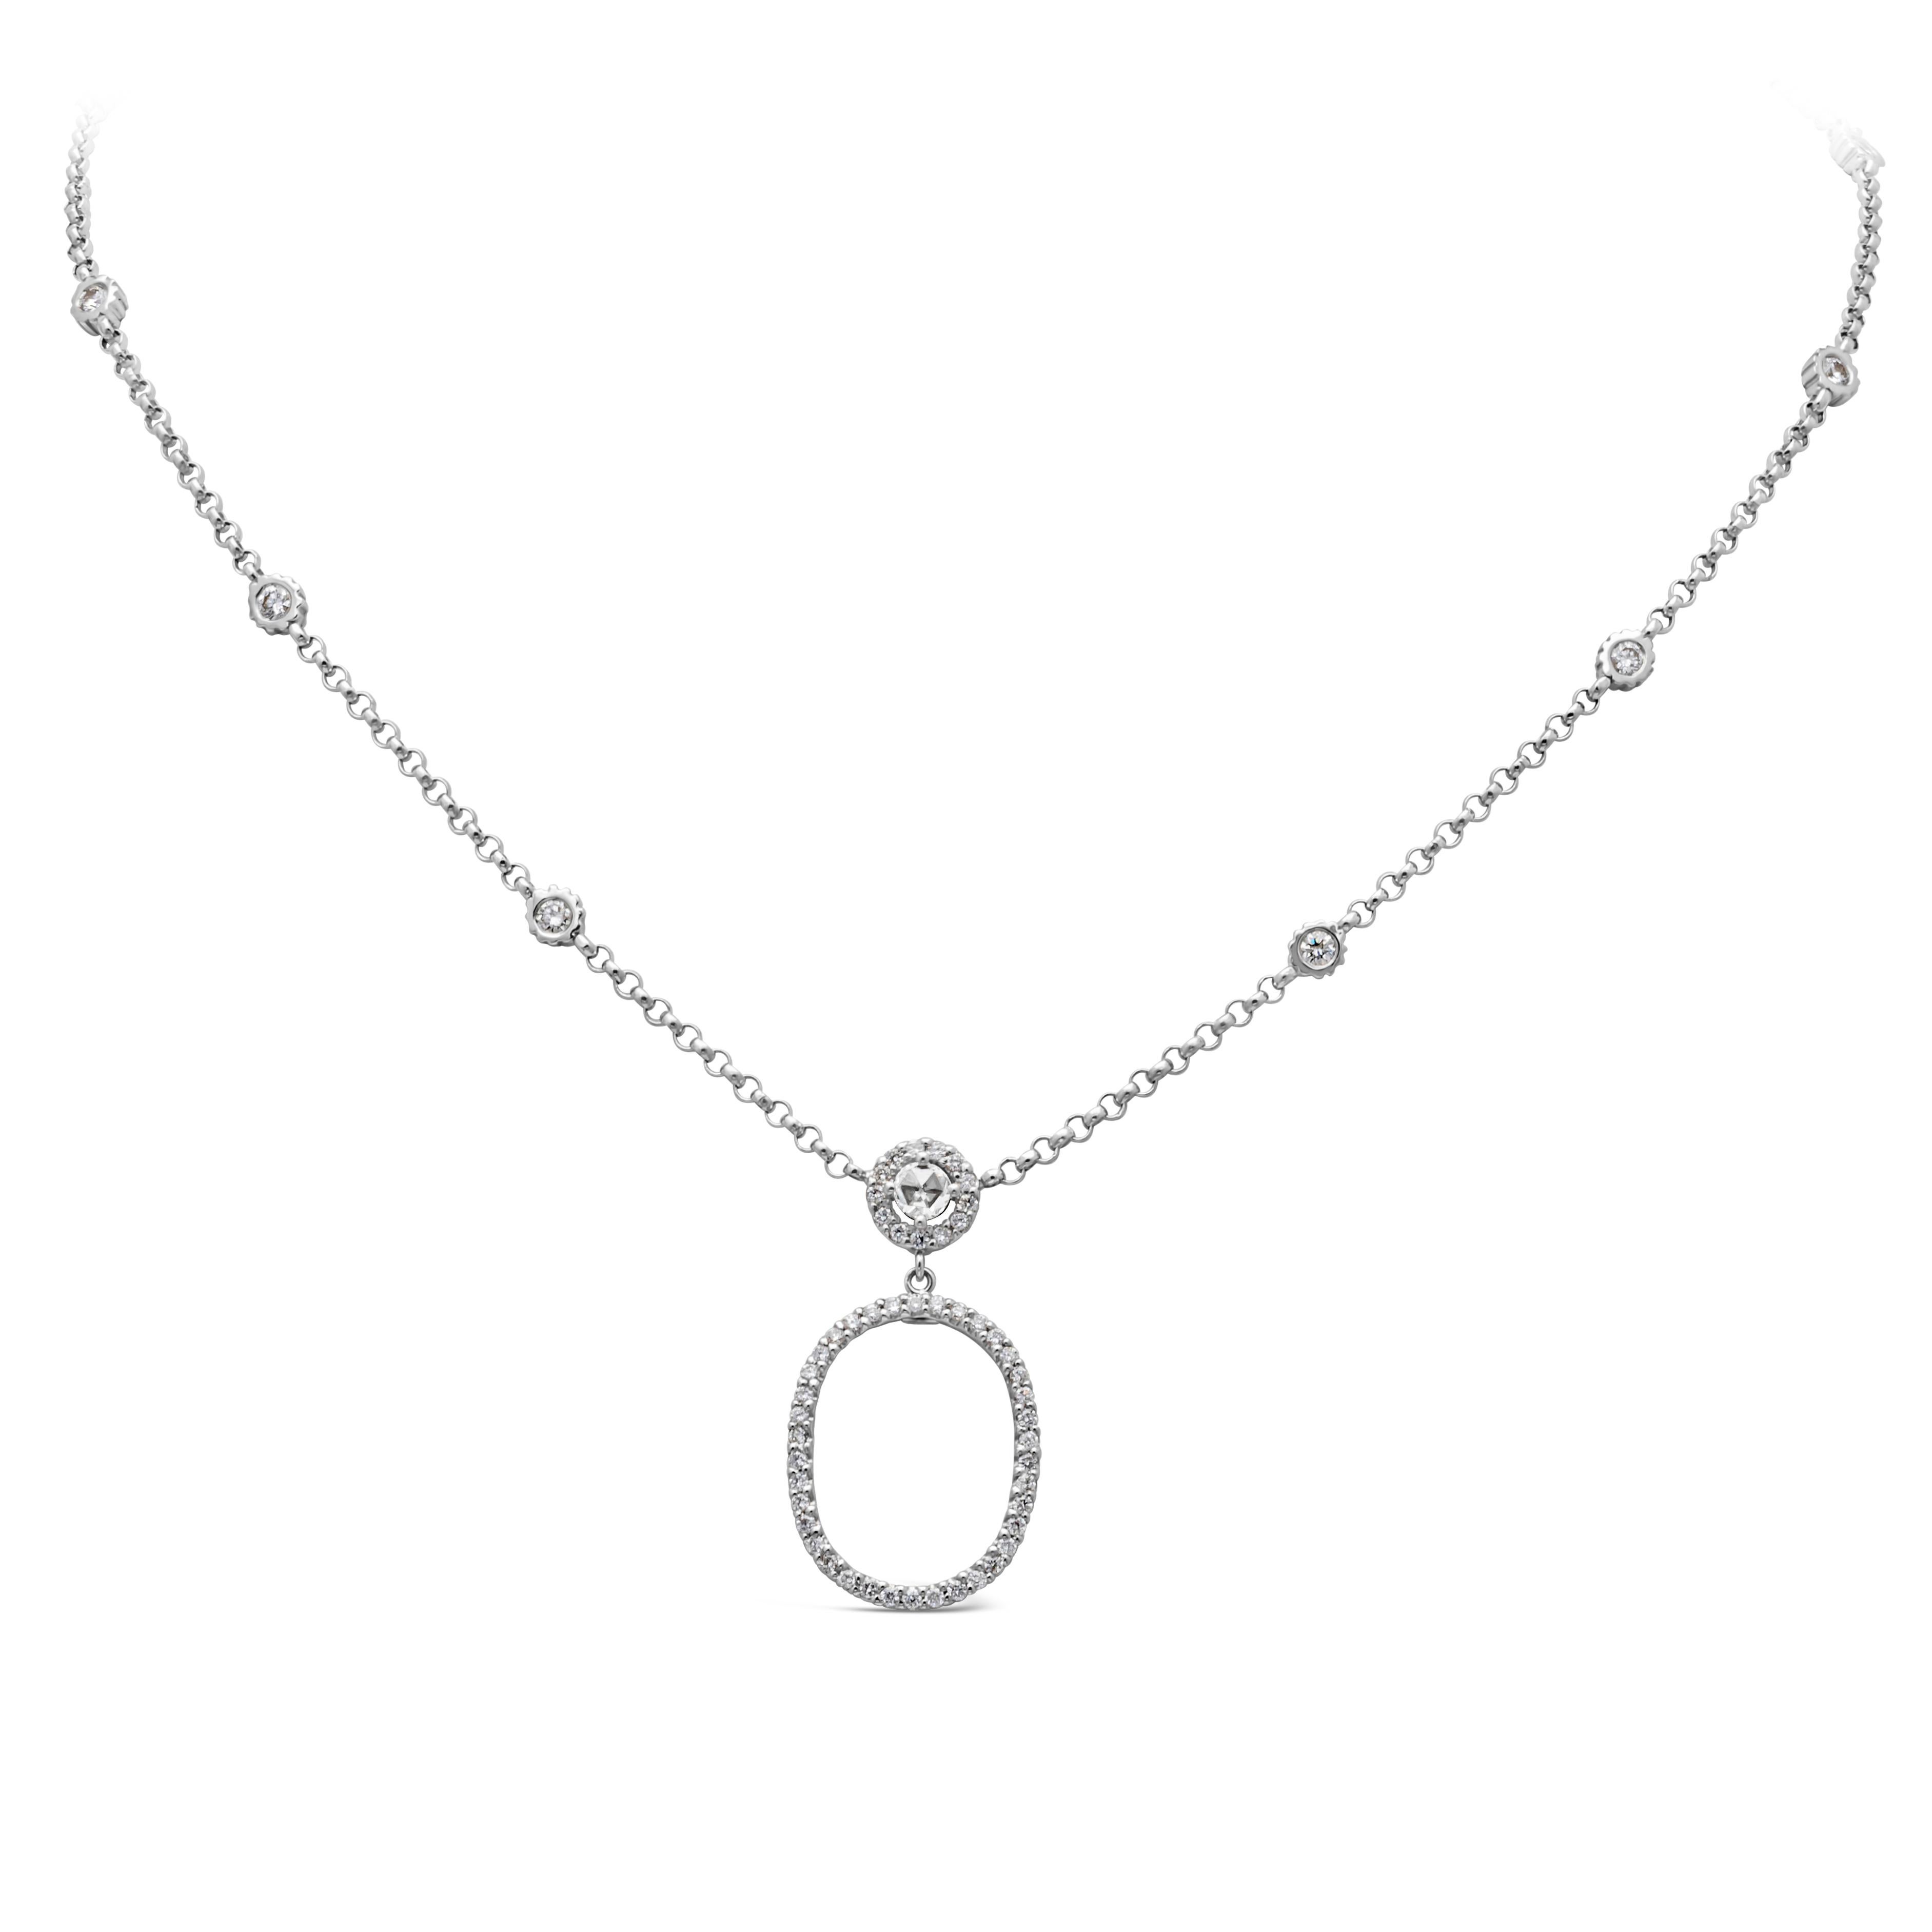 Well crafted pendant necklace showcasing an 18K white gold oval open work design clustered with brilliant round diamonds suspended on an elegant diamond by the yard chain. 60 pieces in total, diamonds weighs 1.40 carat total, G color and VS in